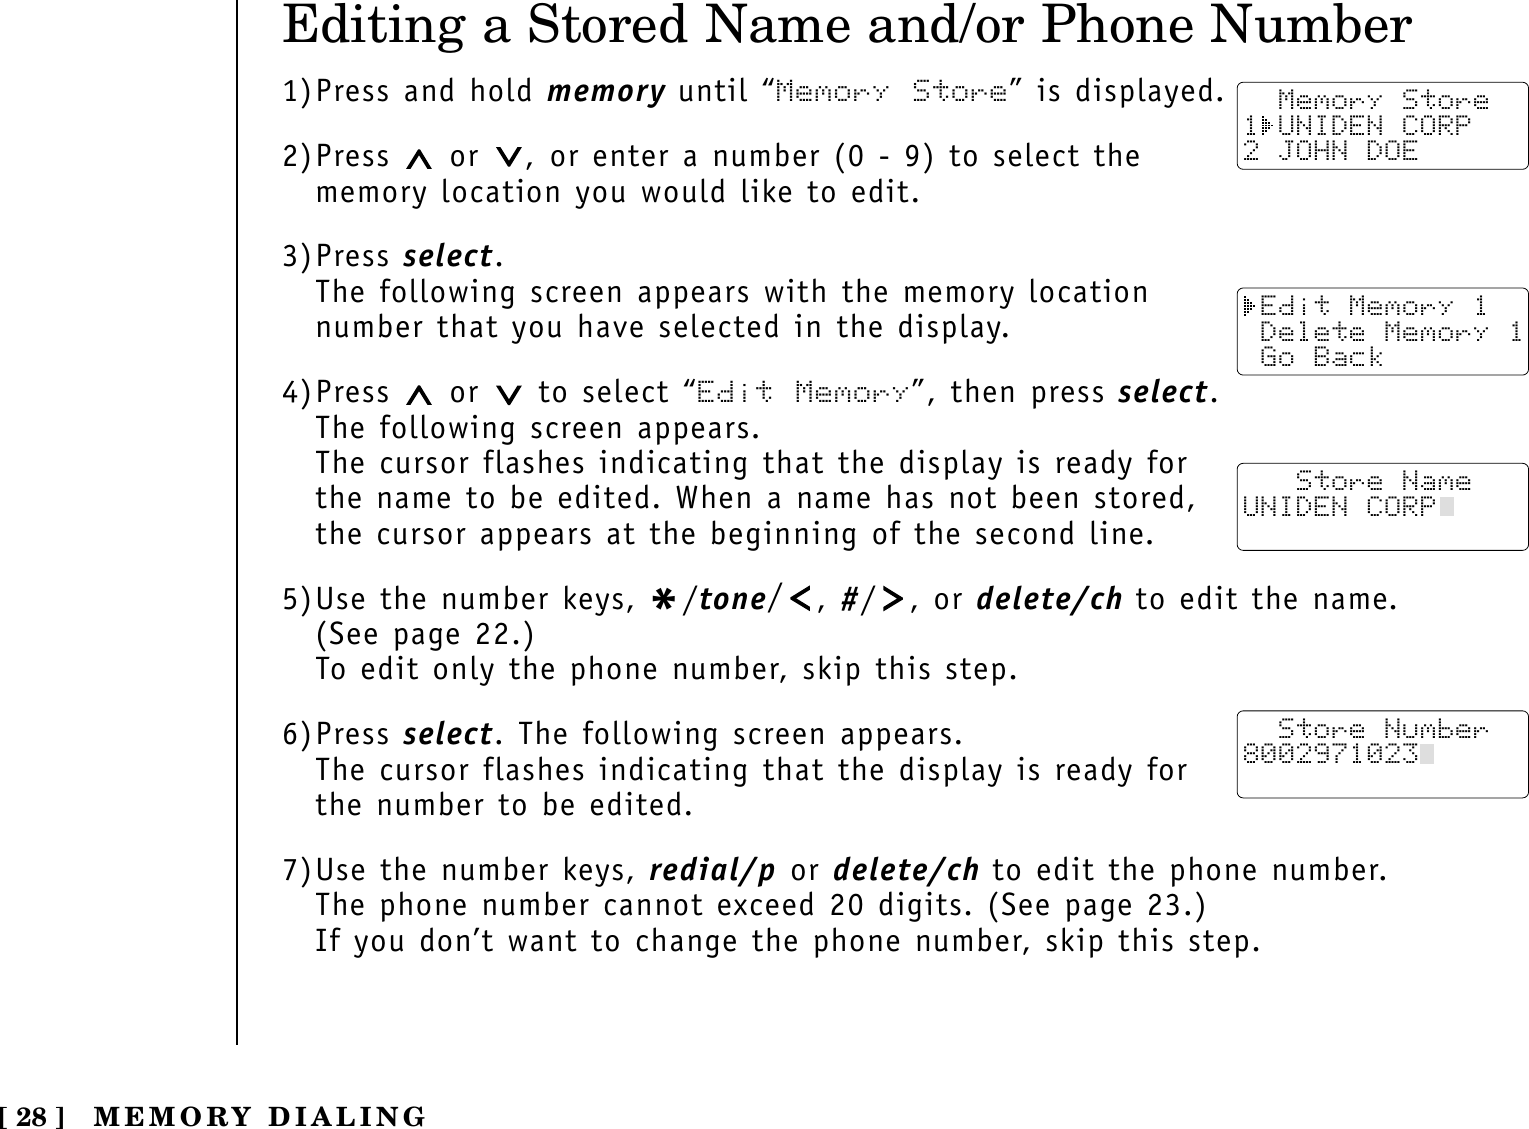 [ 28 ]Editing a Stored Name and/or Phone Number1)Press and hold memory until “Memory Store” is displayed.2)Press  or  , or enter a number (0 - 9) to select thememory location you would like to edit.3)Press select.The following screen appears with the memory location number that you have selected in the display.4)Press  or  to select “Edit Memory”, then press select.The following screen appears.The cursor flashes indicating that the display is ready forthe name to be edited. When a name has not been stored,the cursor appears at the beginning of the second line.5)Use the number keys, */tone/, #/ , or delete/ch to edit the name. (See page 22.)To edit only the phone number, skip this step.6)Press select. The following screen appears.The cursor flashes indicating that the display is ready forthe number to be edited.7)Use the number keys, redial/p or delete/ch to edit the phone number. The phone number cannot exceed 20 digits. (See page 23.)If you don’t want to change the phone number, skip this step.  Memory Store1 UNIDEN CORP2 JOHN DOE Edit Memory 1 Delete Memory 1 Go Back   Store NameUNIDEN CORP  Store Number8002971023  MEMORY DIALING